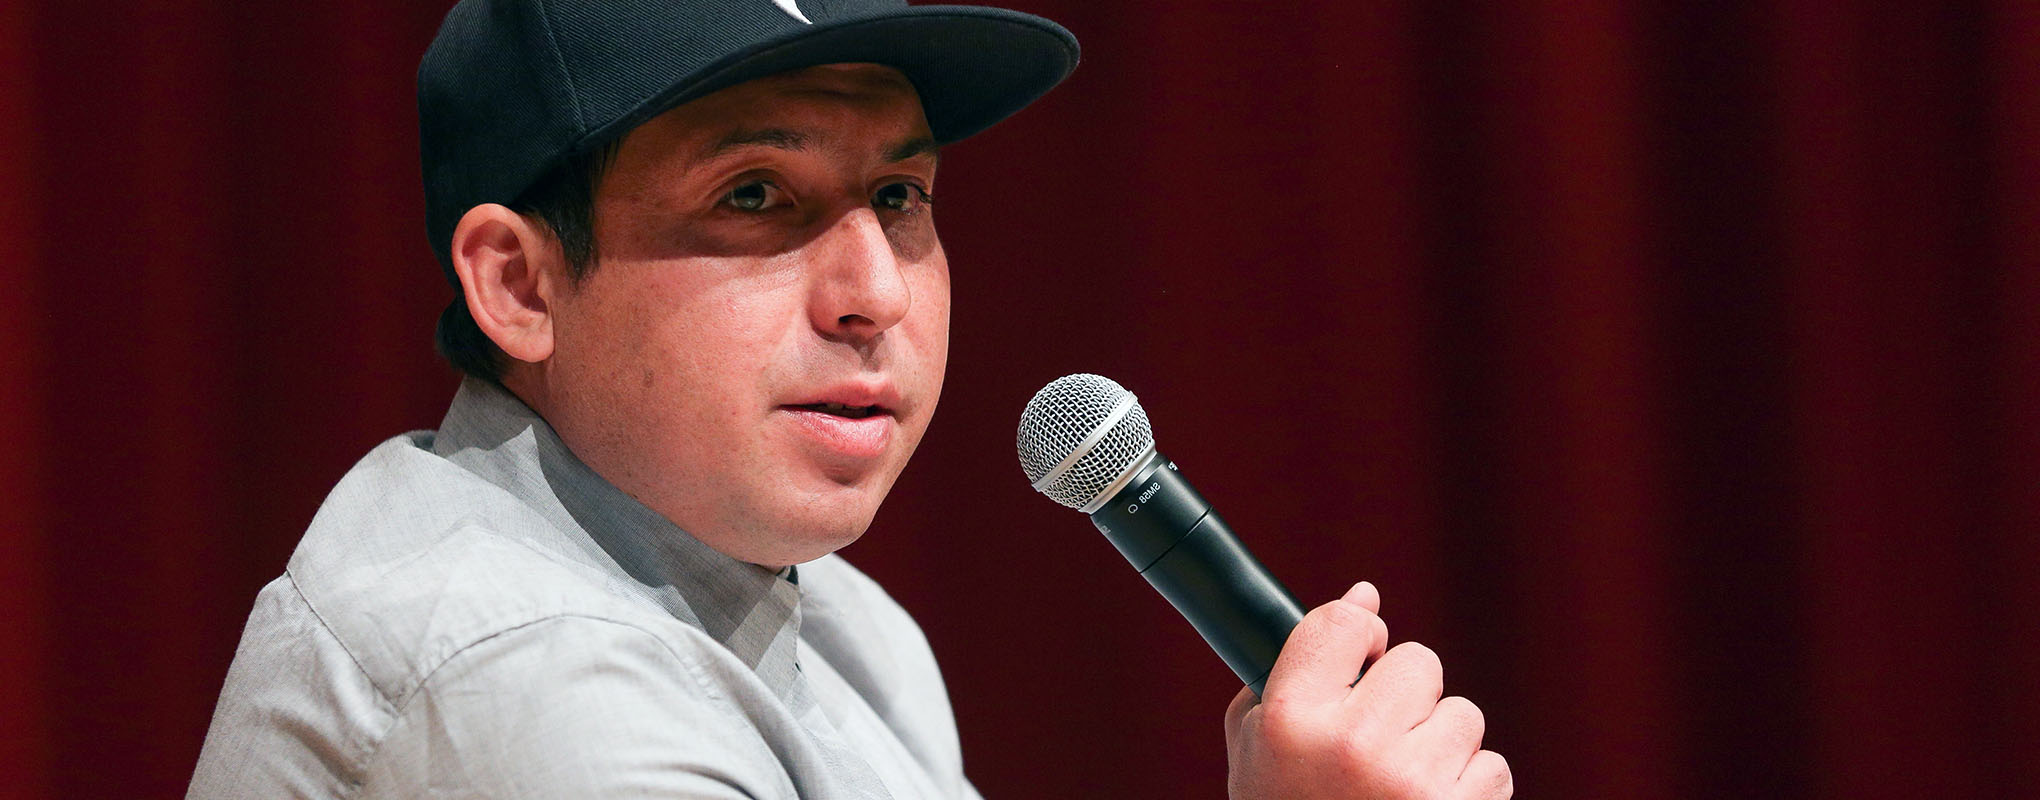 Novelist Tommy Orange with microphone